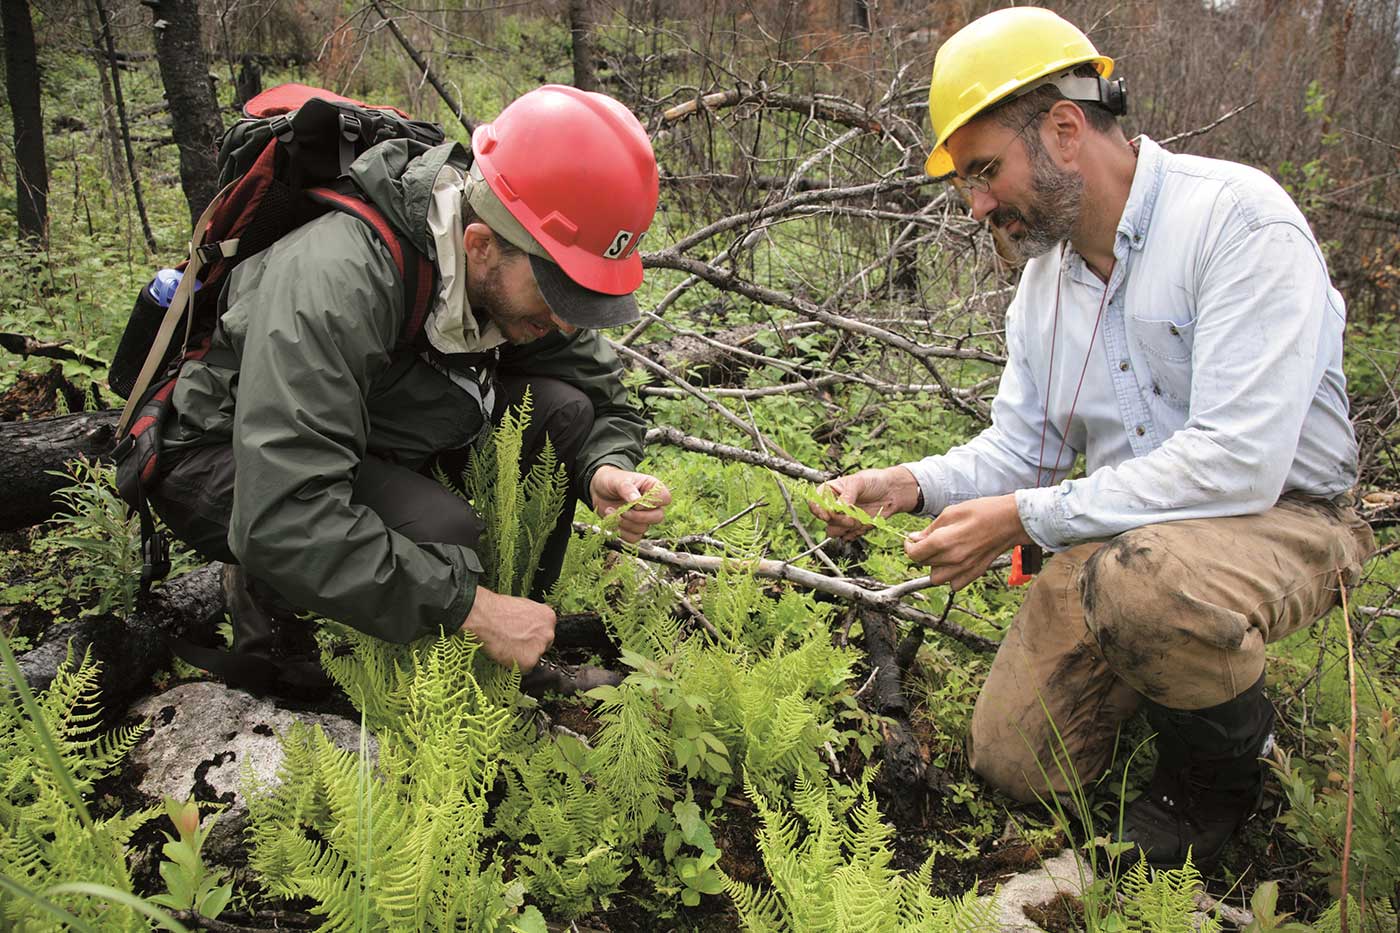 Two men wearing hardhats examine ferns in a forest.